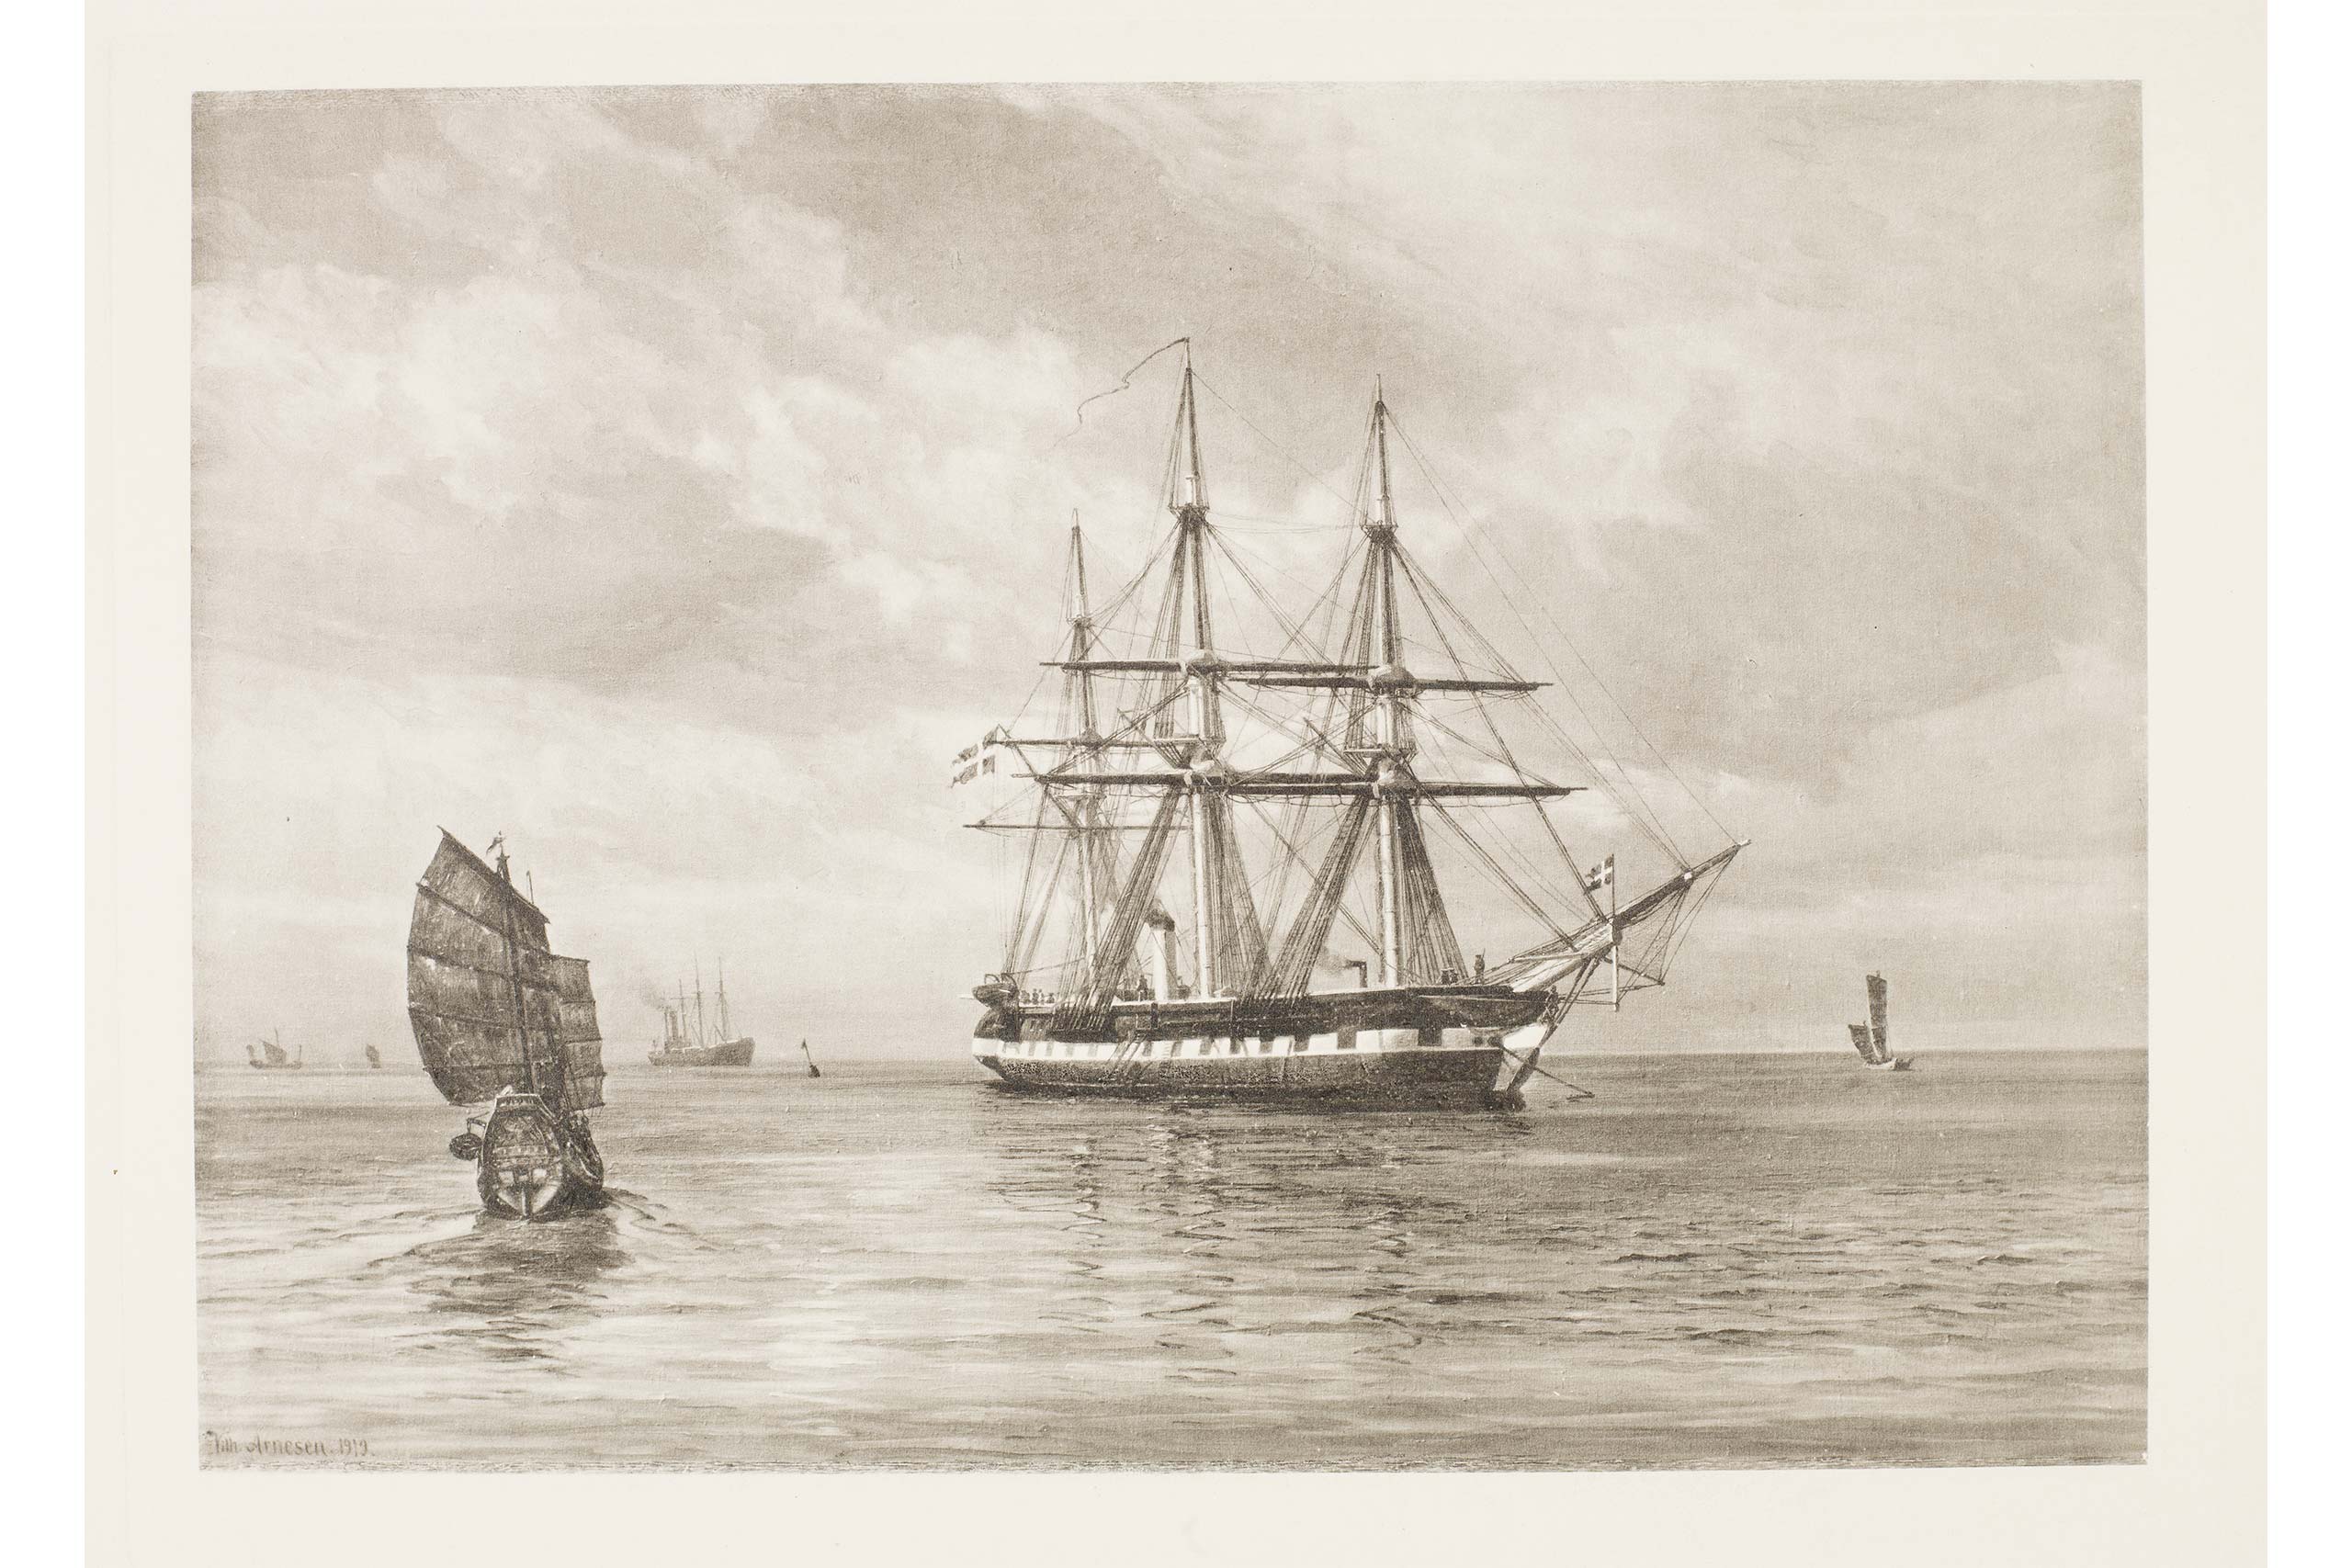 A drawing of the Tordenskjold ship, which set out to lay the first submarine cables in Hong Kong